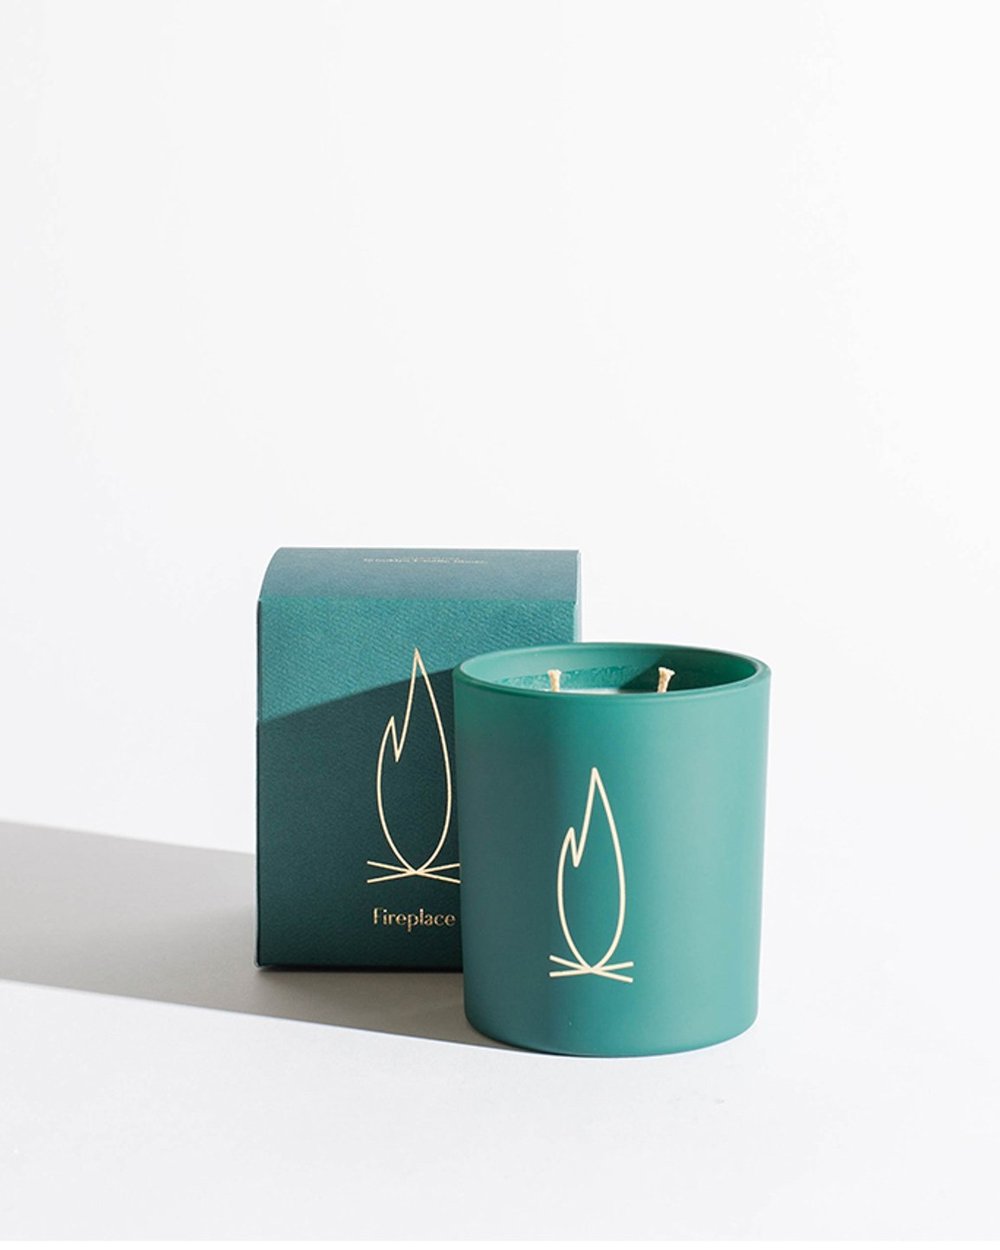 Fireplace Limited Edition Candle